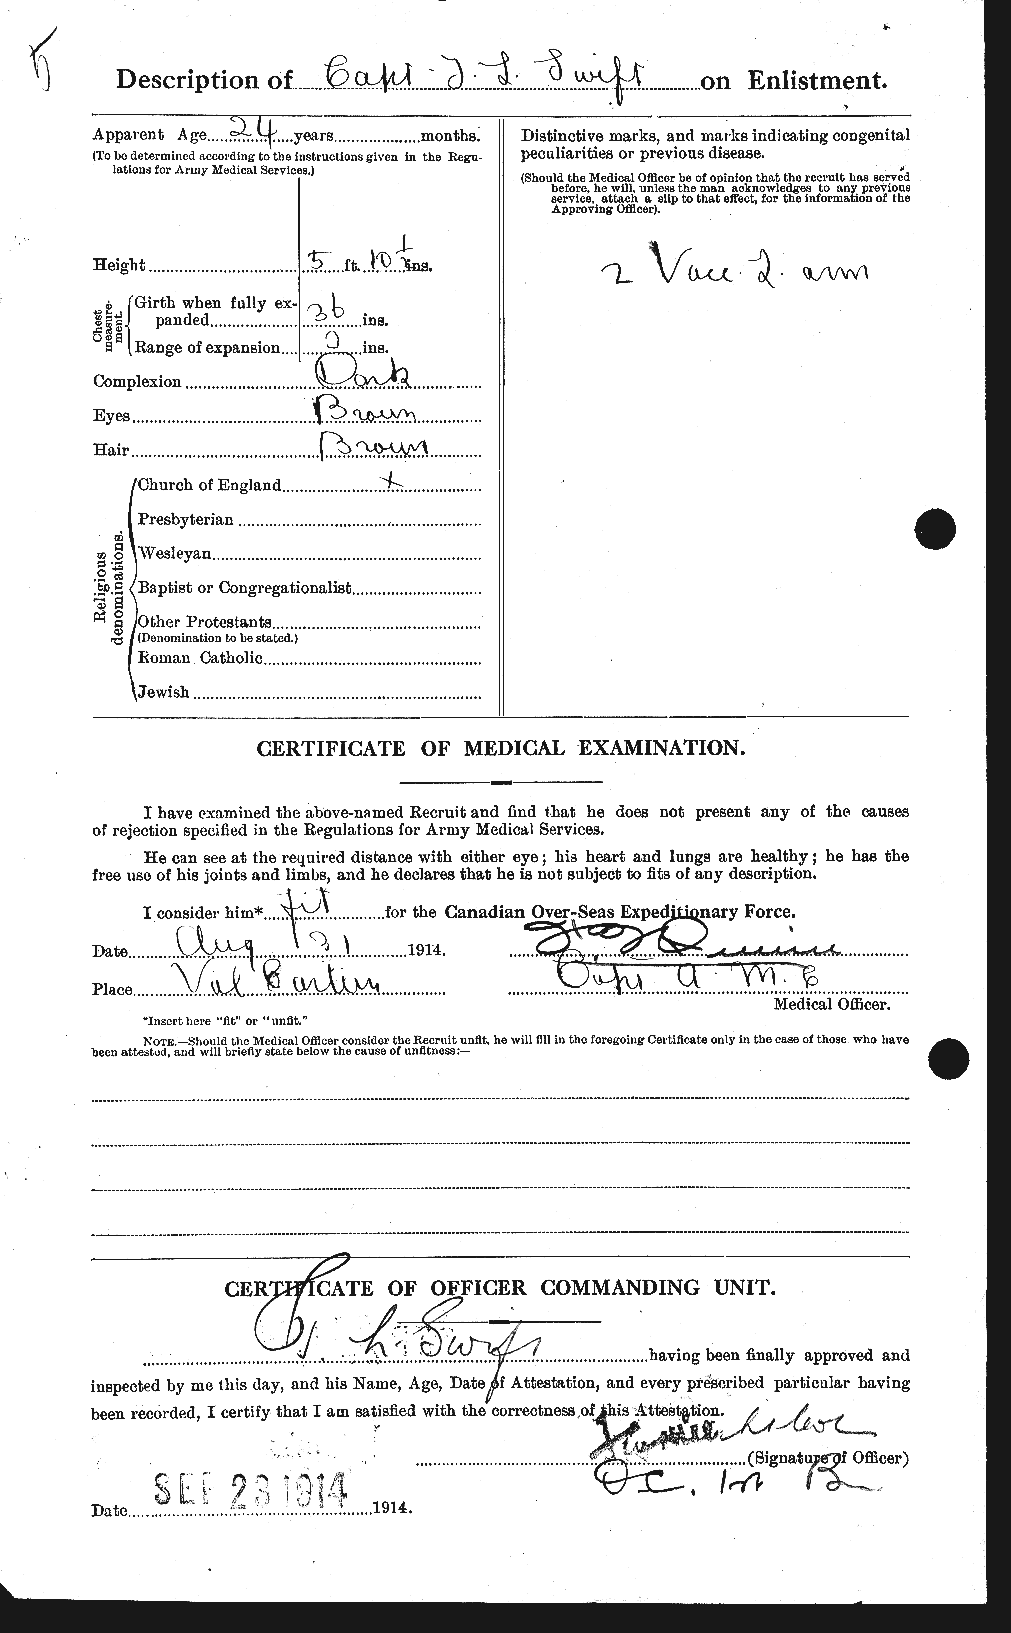 Personnel Records of the First World War - CEF 128518b